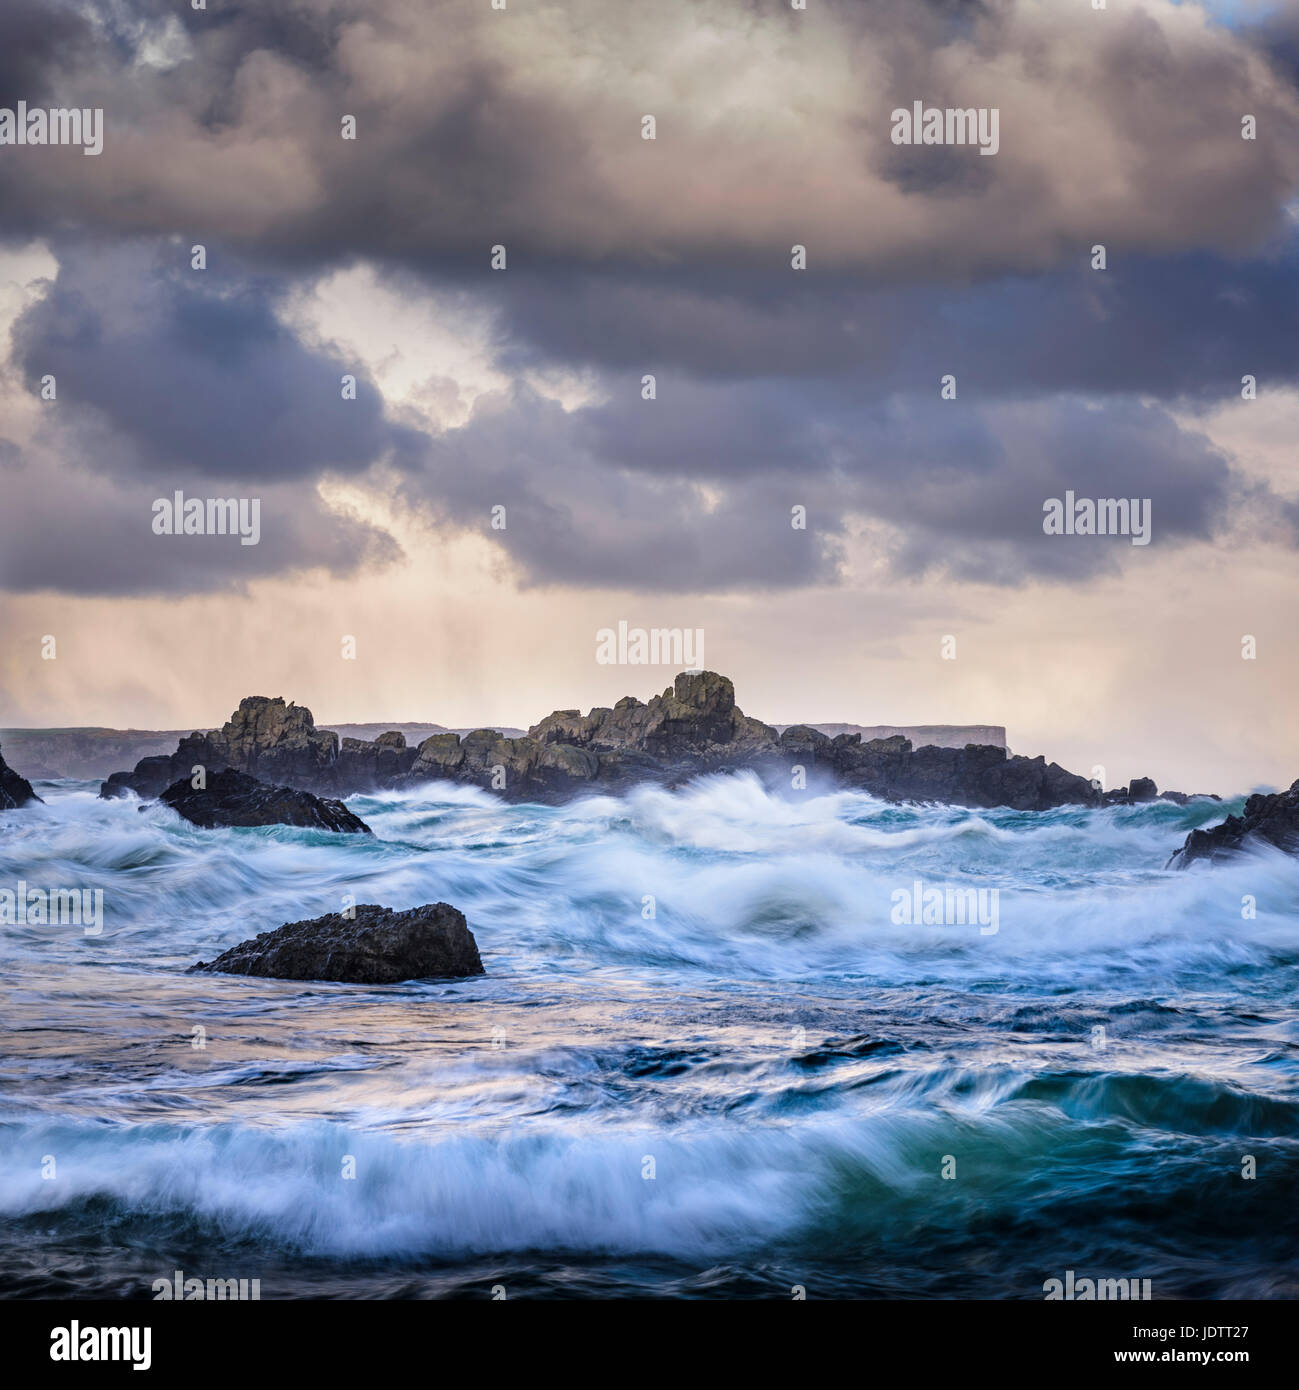 Stormy ominous sky and sea with waves breaking on rocky shore of Irish coast Stock Photo